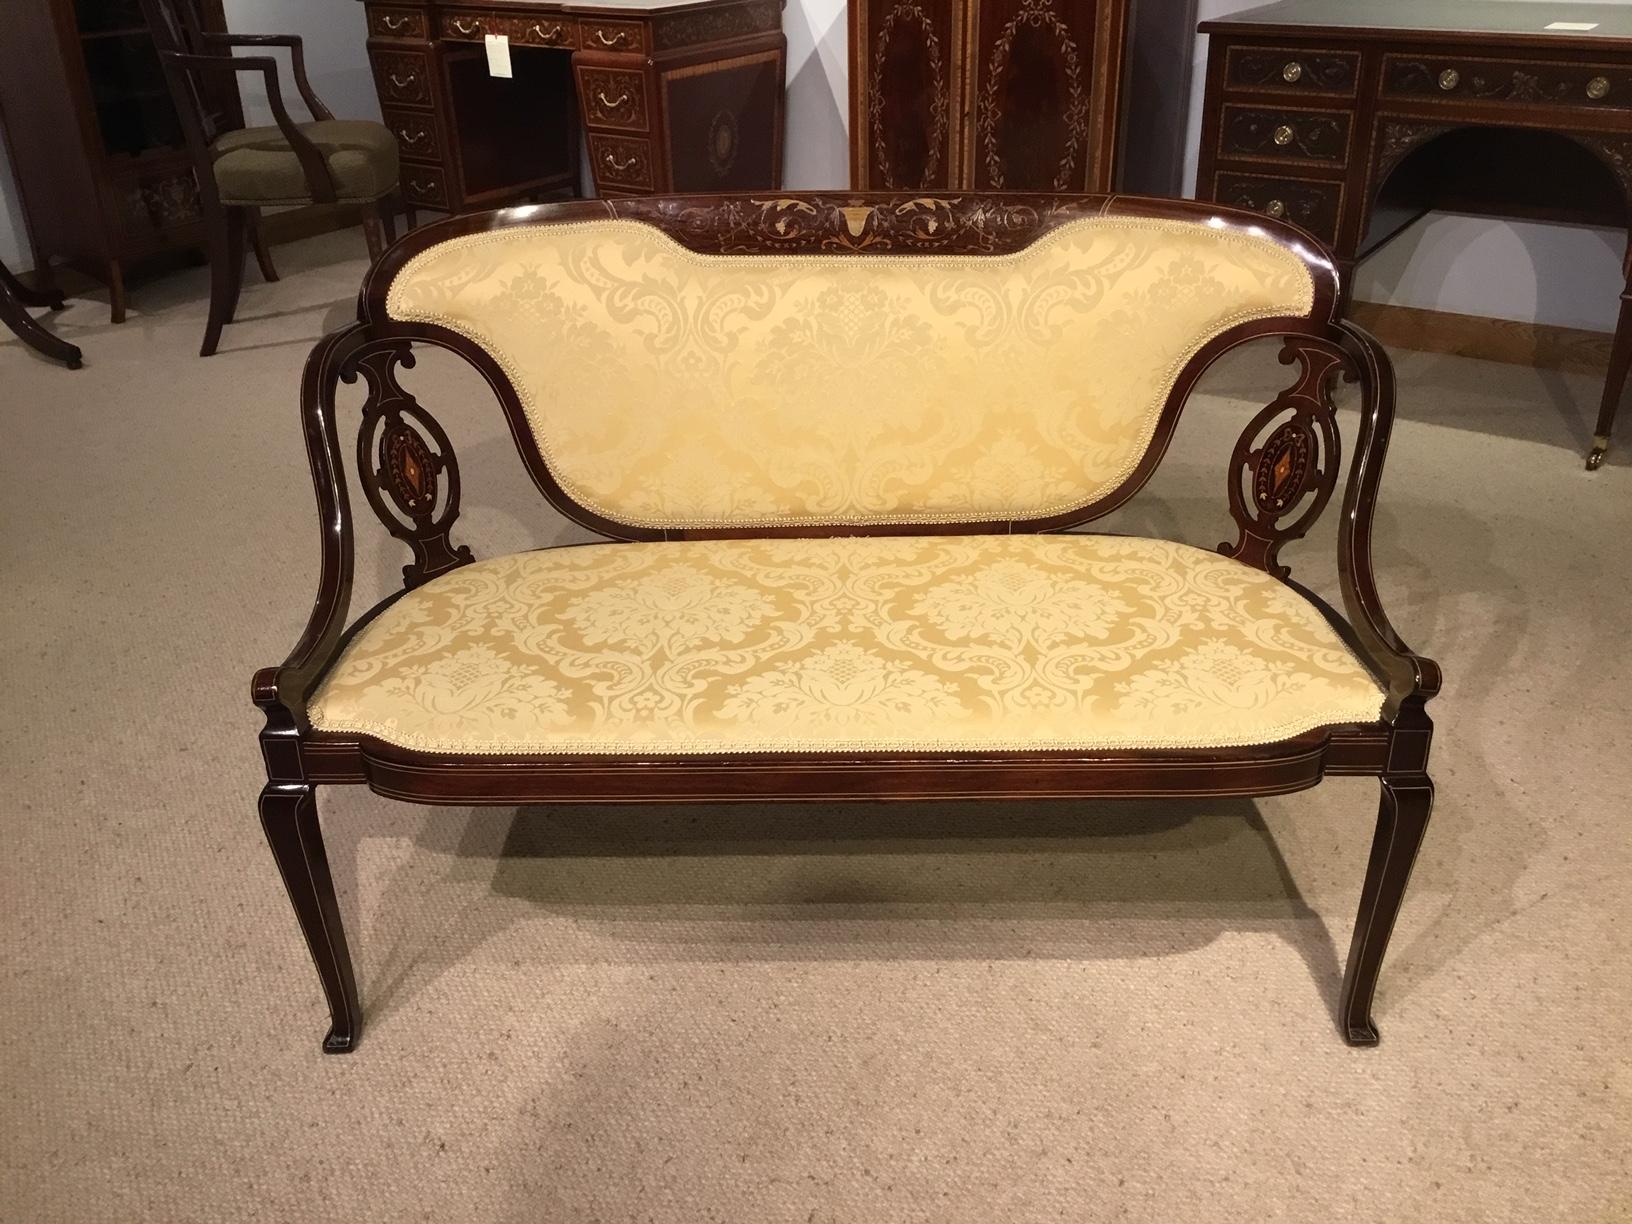 A marquetry inlaid Edwardian period antique settee. Having a curved back with a fine marquetry and pen-work inlaid panel above the central padded back, flanked by pierced fretwork panels, with open arms and padded seat. Supported on slender cabriole